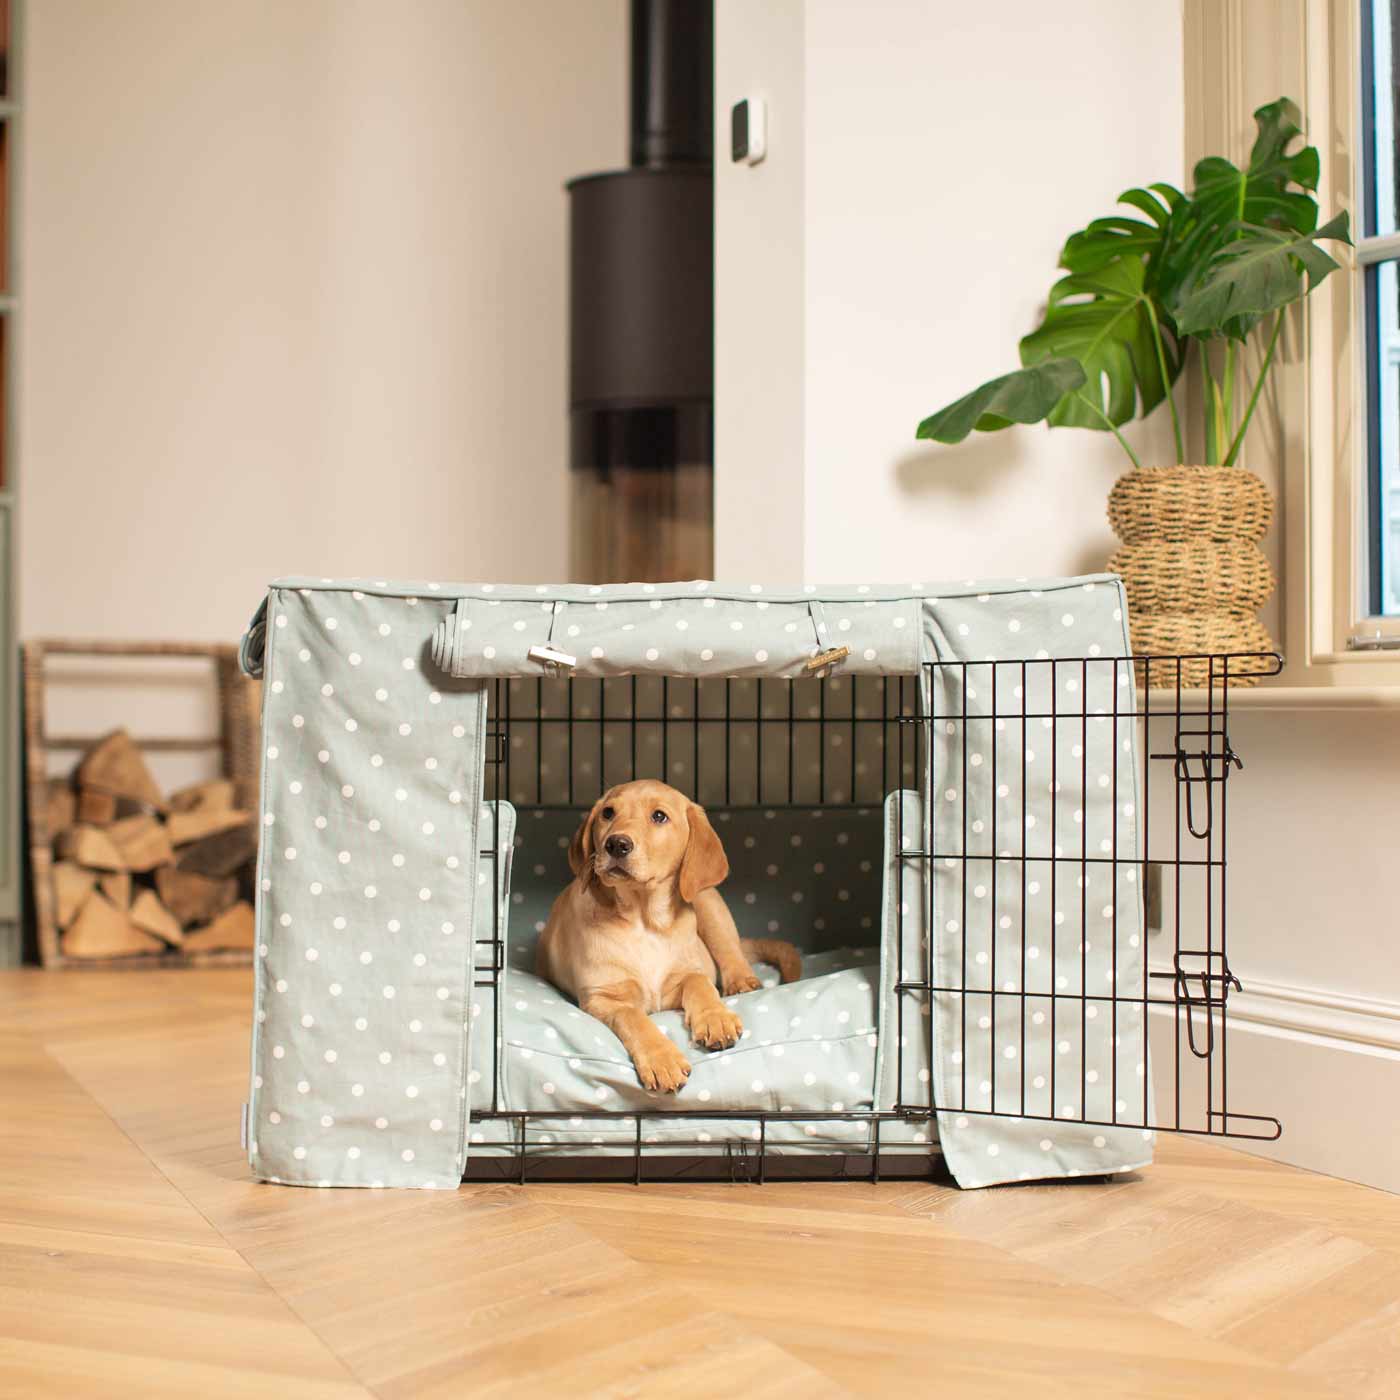 Luxury Heavy Duty Dog Crate, In Stunning Duck Egg Spot Crate Set, The Perfect Dog Crate Set For Building The Ultimate Pet Den! Dog Crate Cover Available To Personalise at Lords & Labradors 